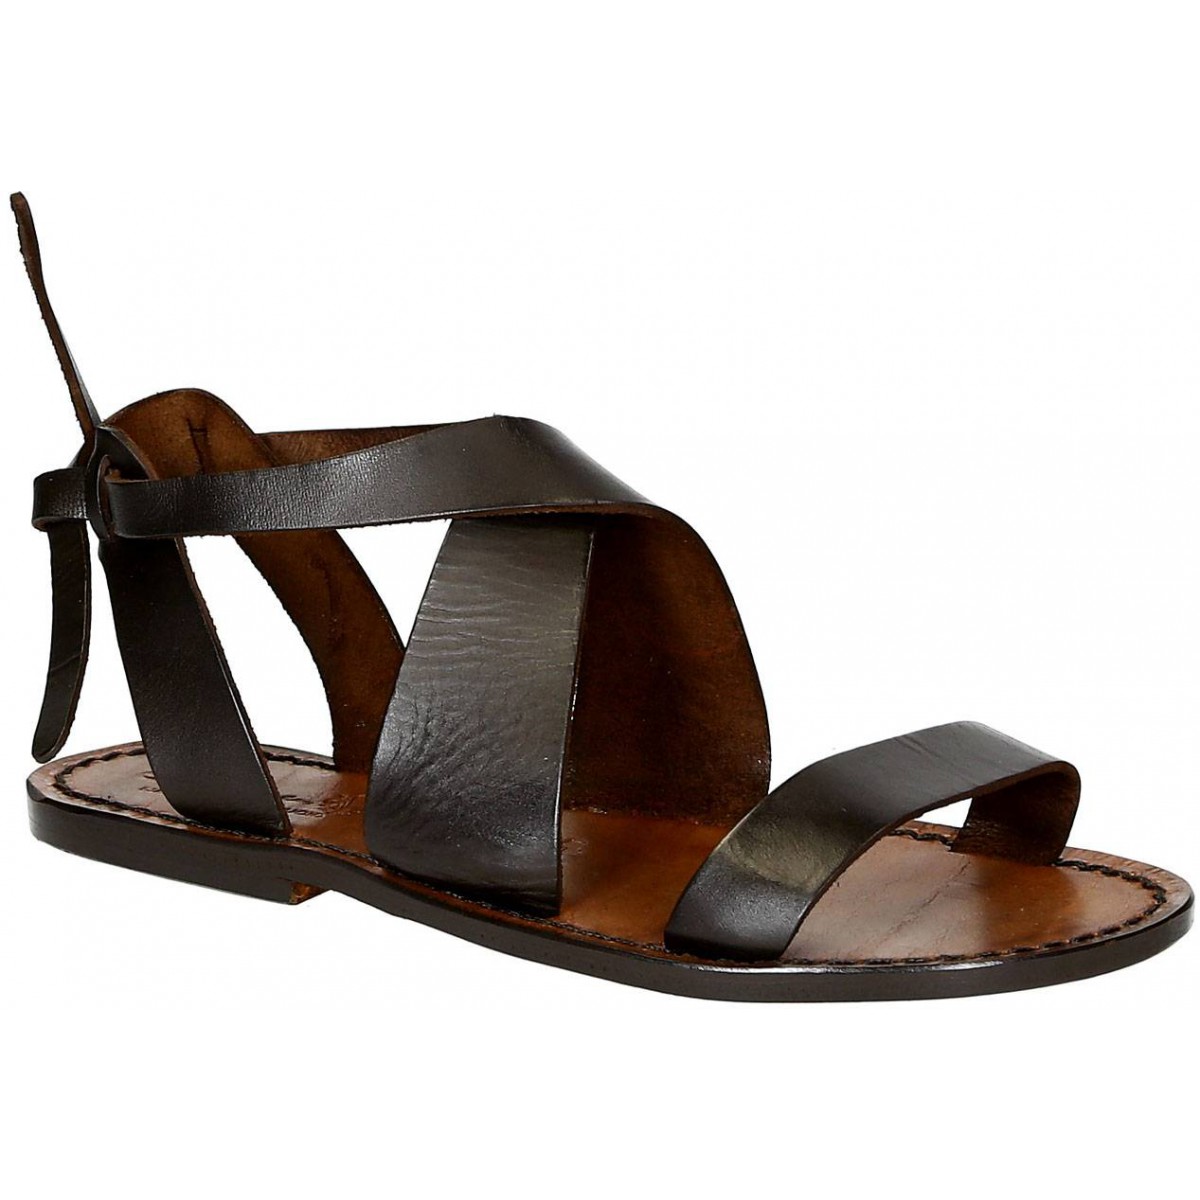 Women's dark brown leather sandals handmade in Italy | The leather ...